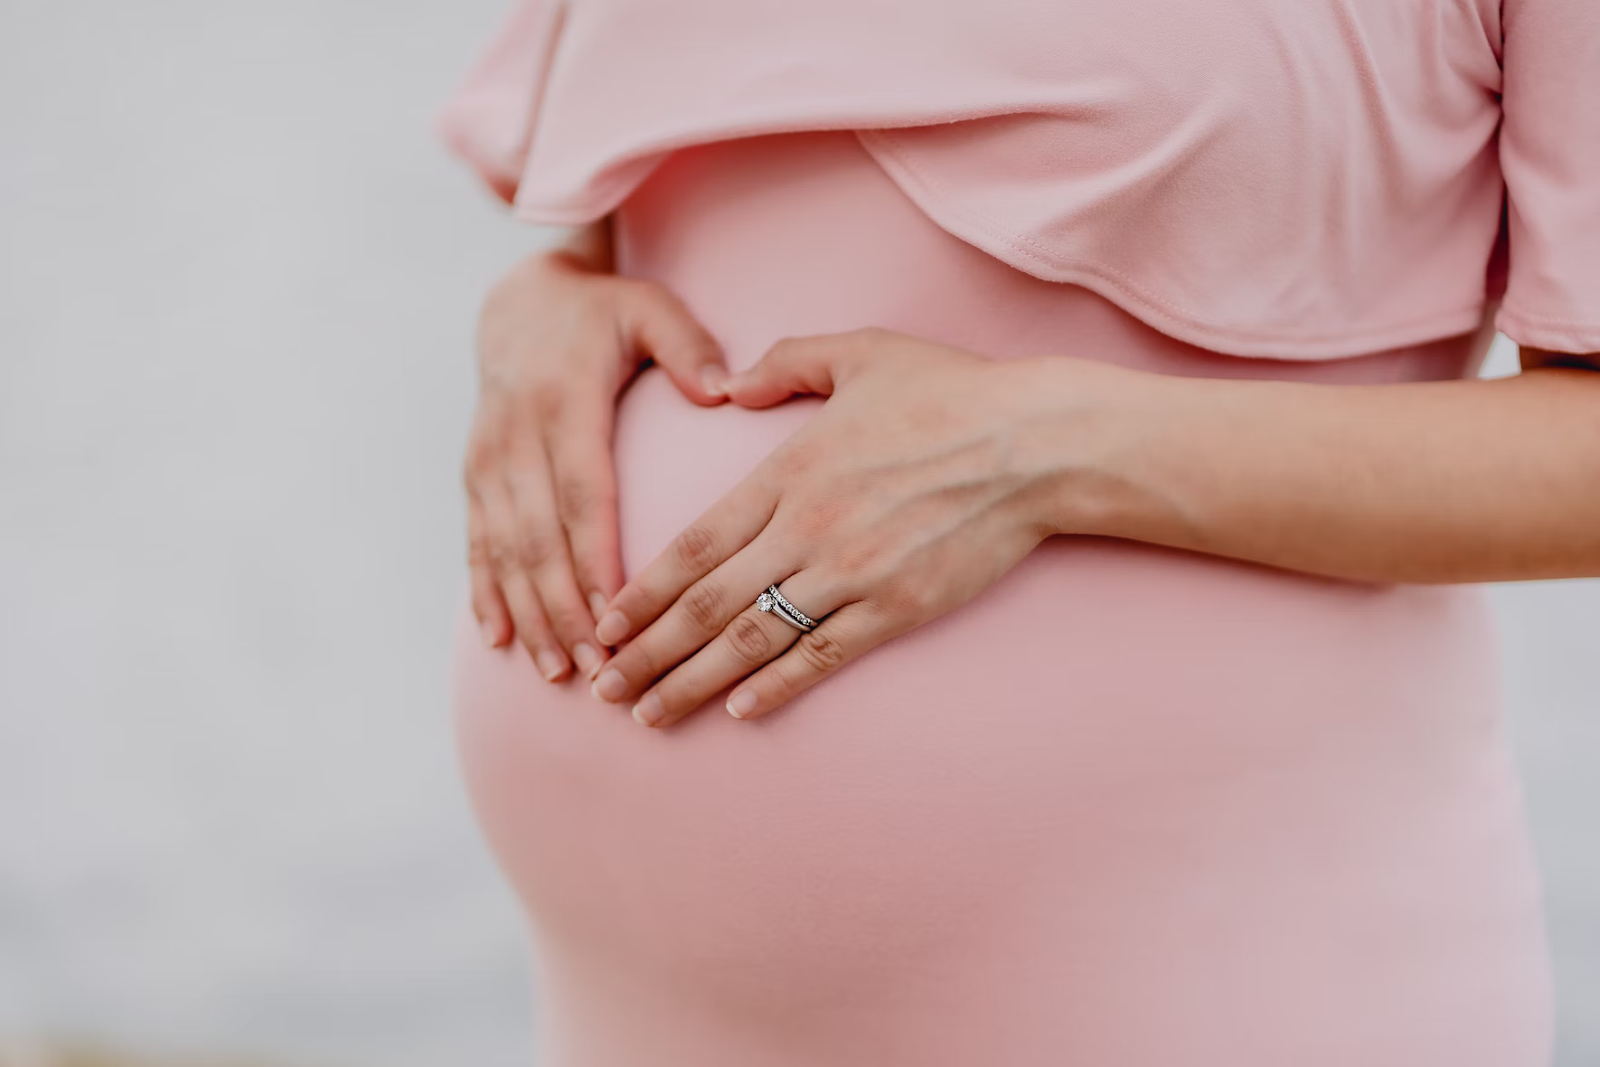 Understanding the meaning of surrogate can be important when discussing pregnancy — here’s what you need to know about it!